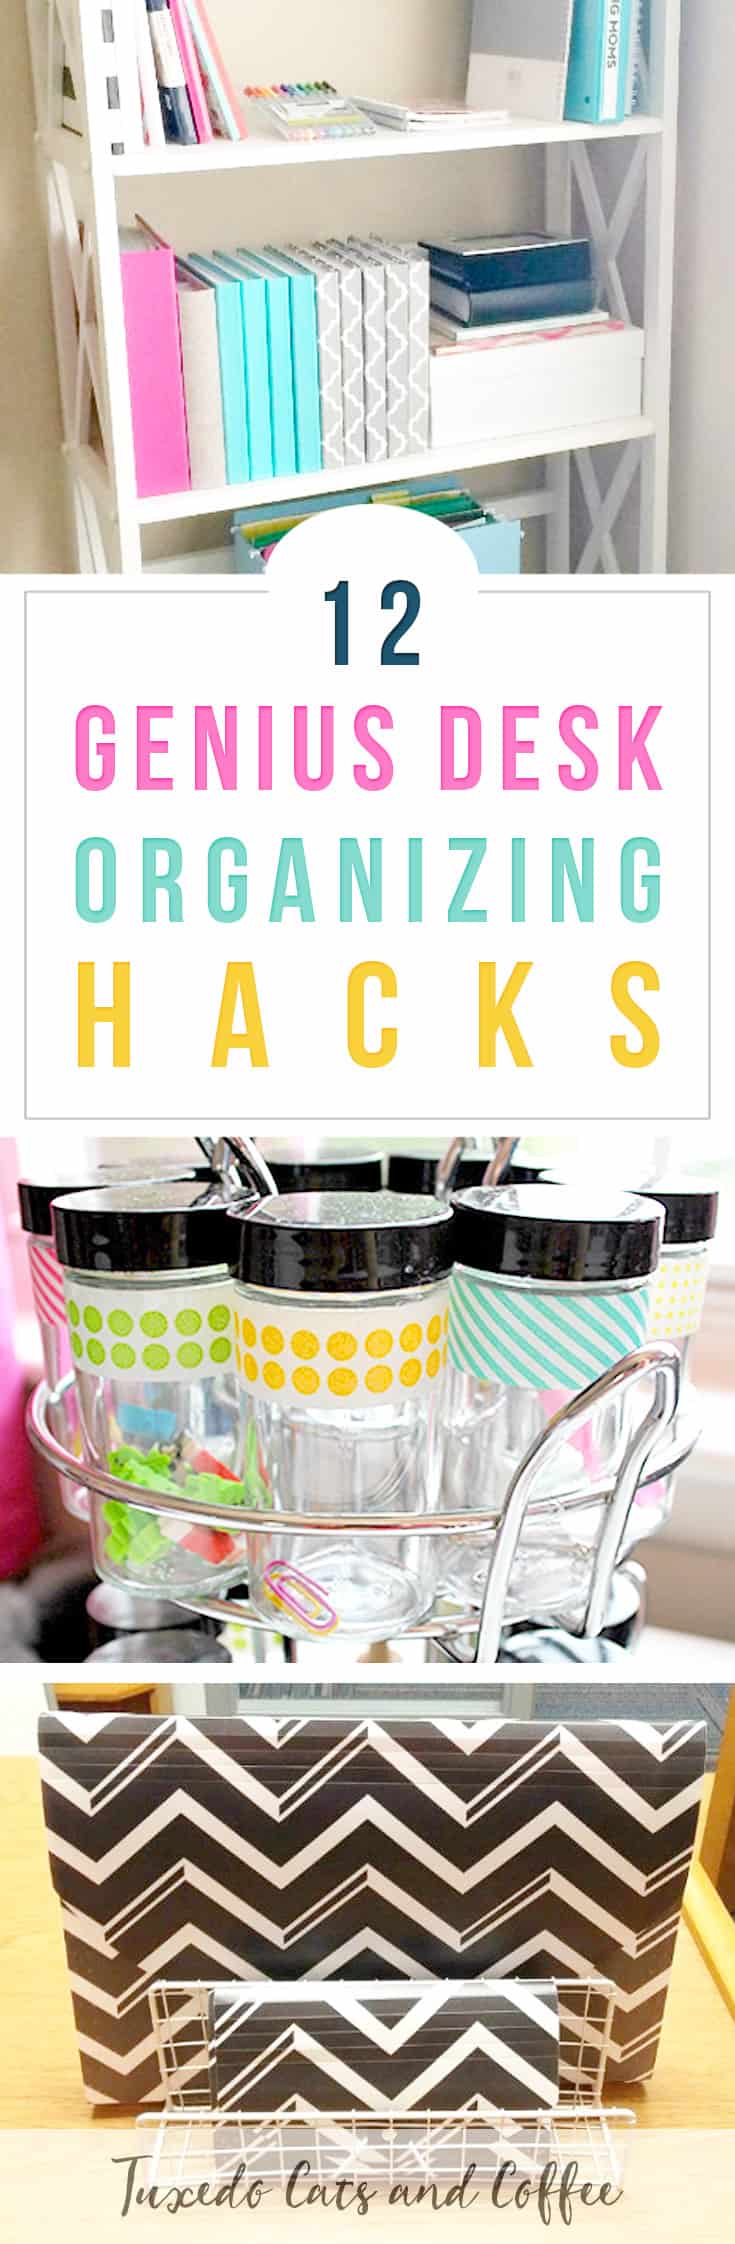 Is your office or desk space a cluttered mess? Are you finding it hard to be productive or get things done because you can't find anything and your desk is covered in papers and junk? Here are 12 genius desk organizing hacks to help get your home office together!